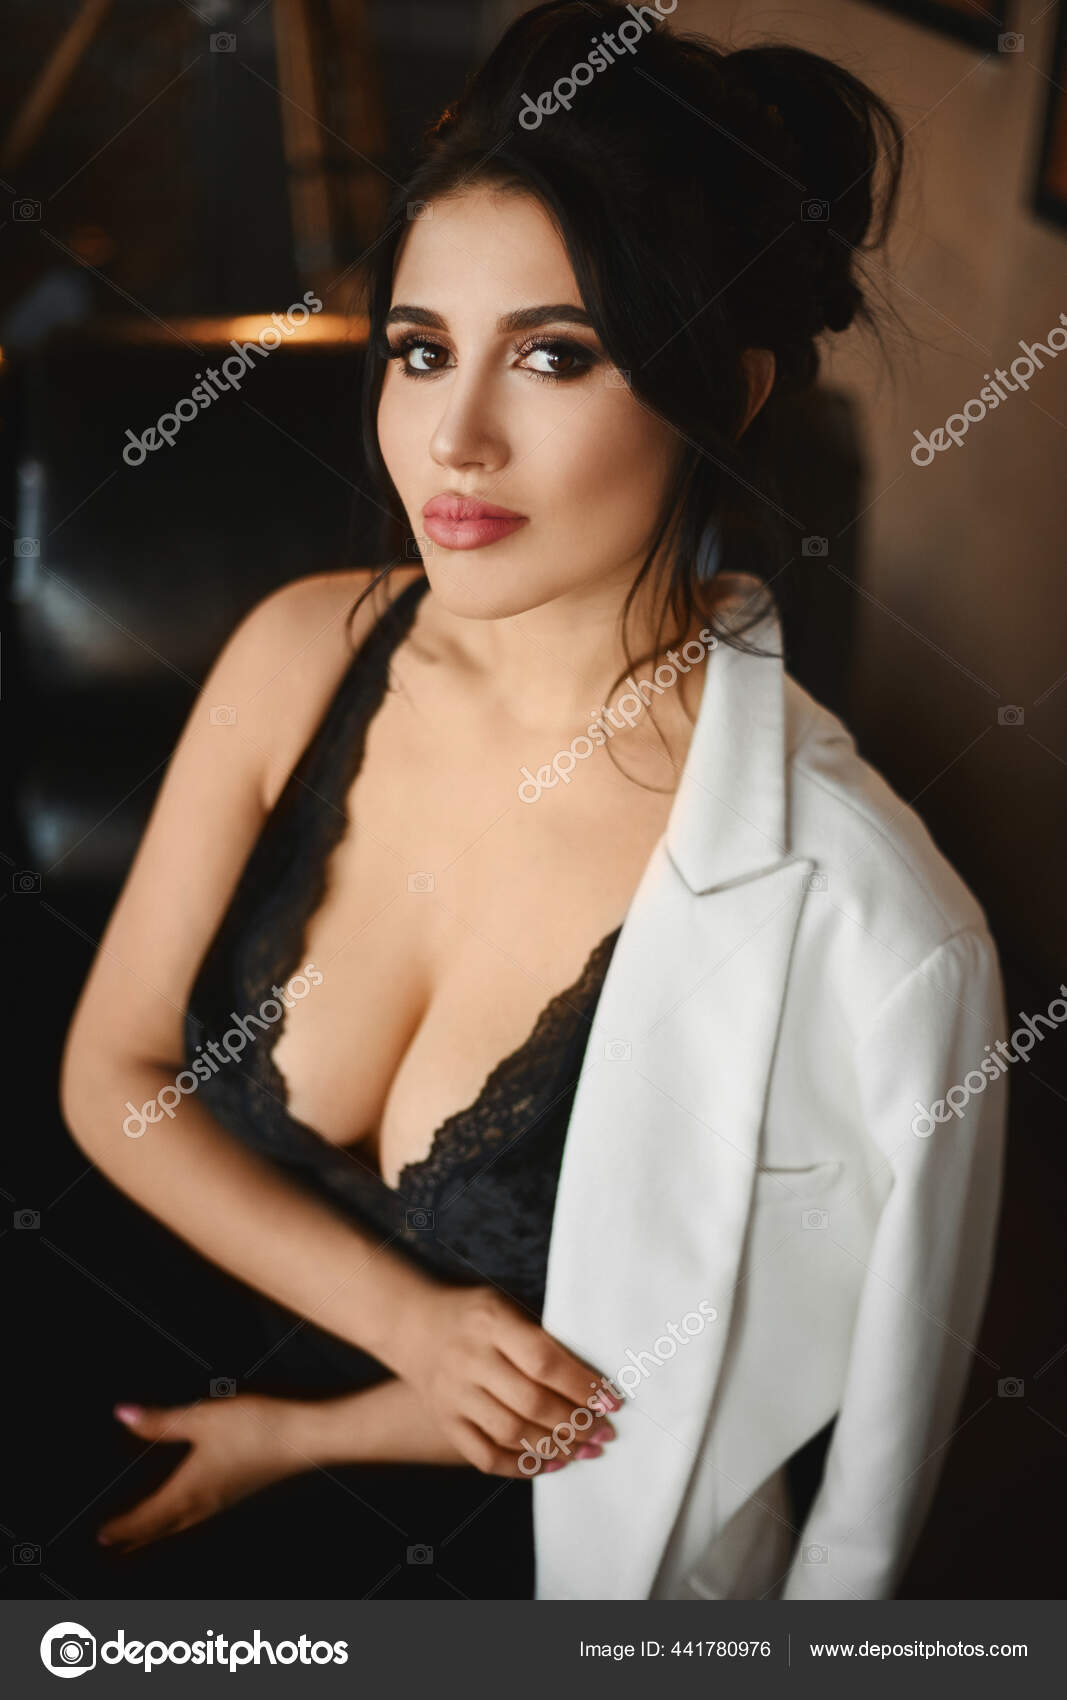 Beautiful Busty Naked Latinas - Portrait of the sexy Latino woman with big breasts in a black sexy outfit  looking in the camera. Busty model woman with bright makeup and full lips  Stock Photo by Â©innarevyako 441780976